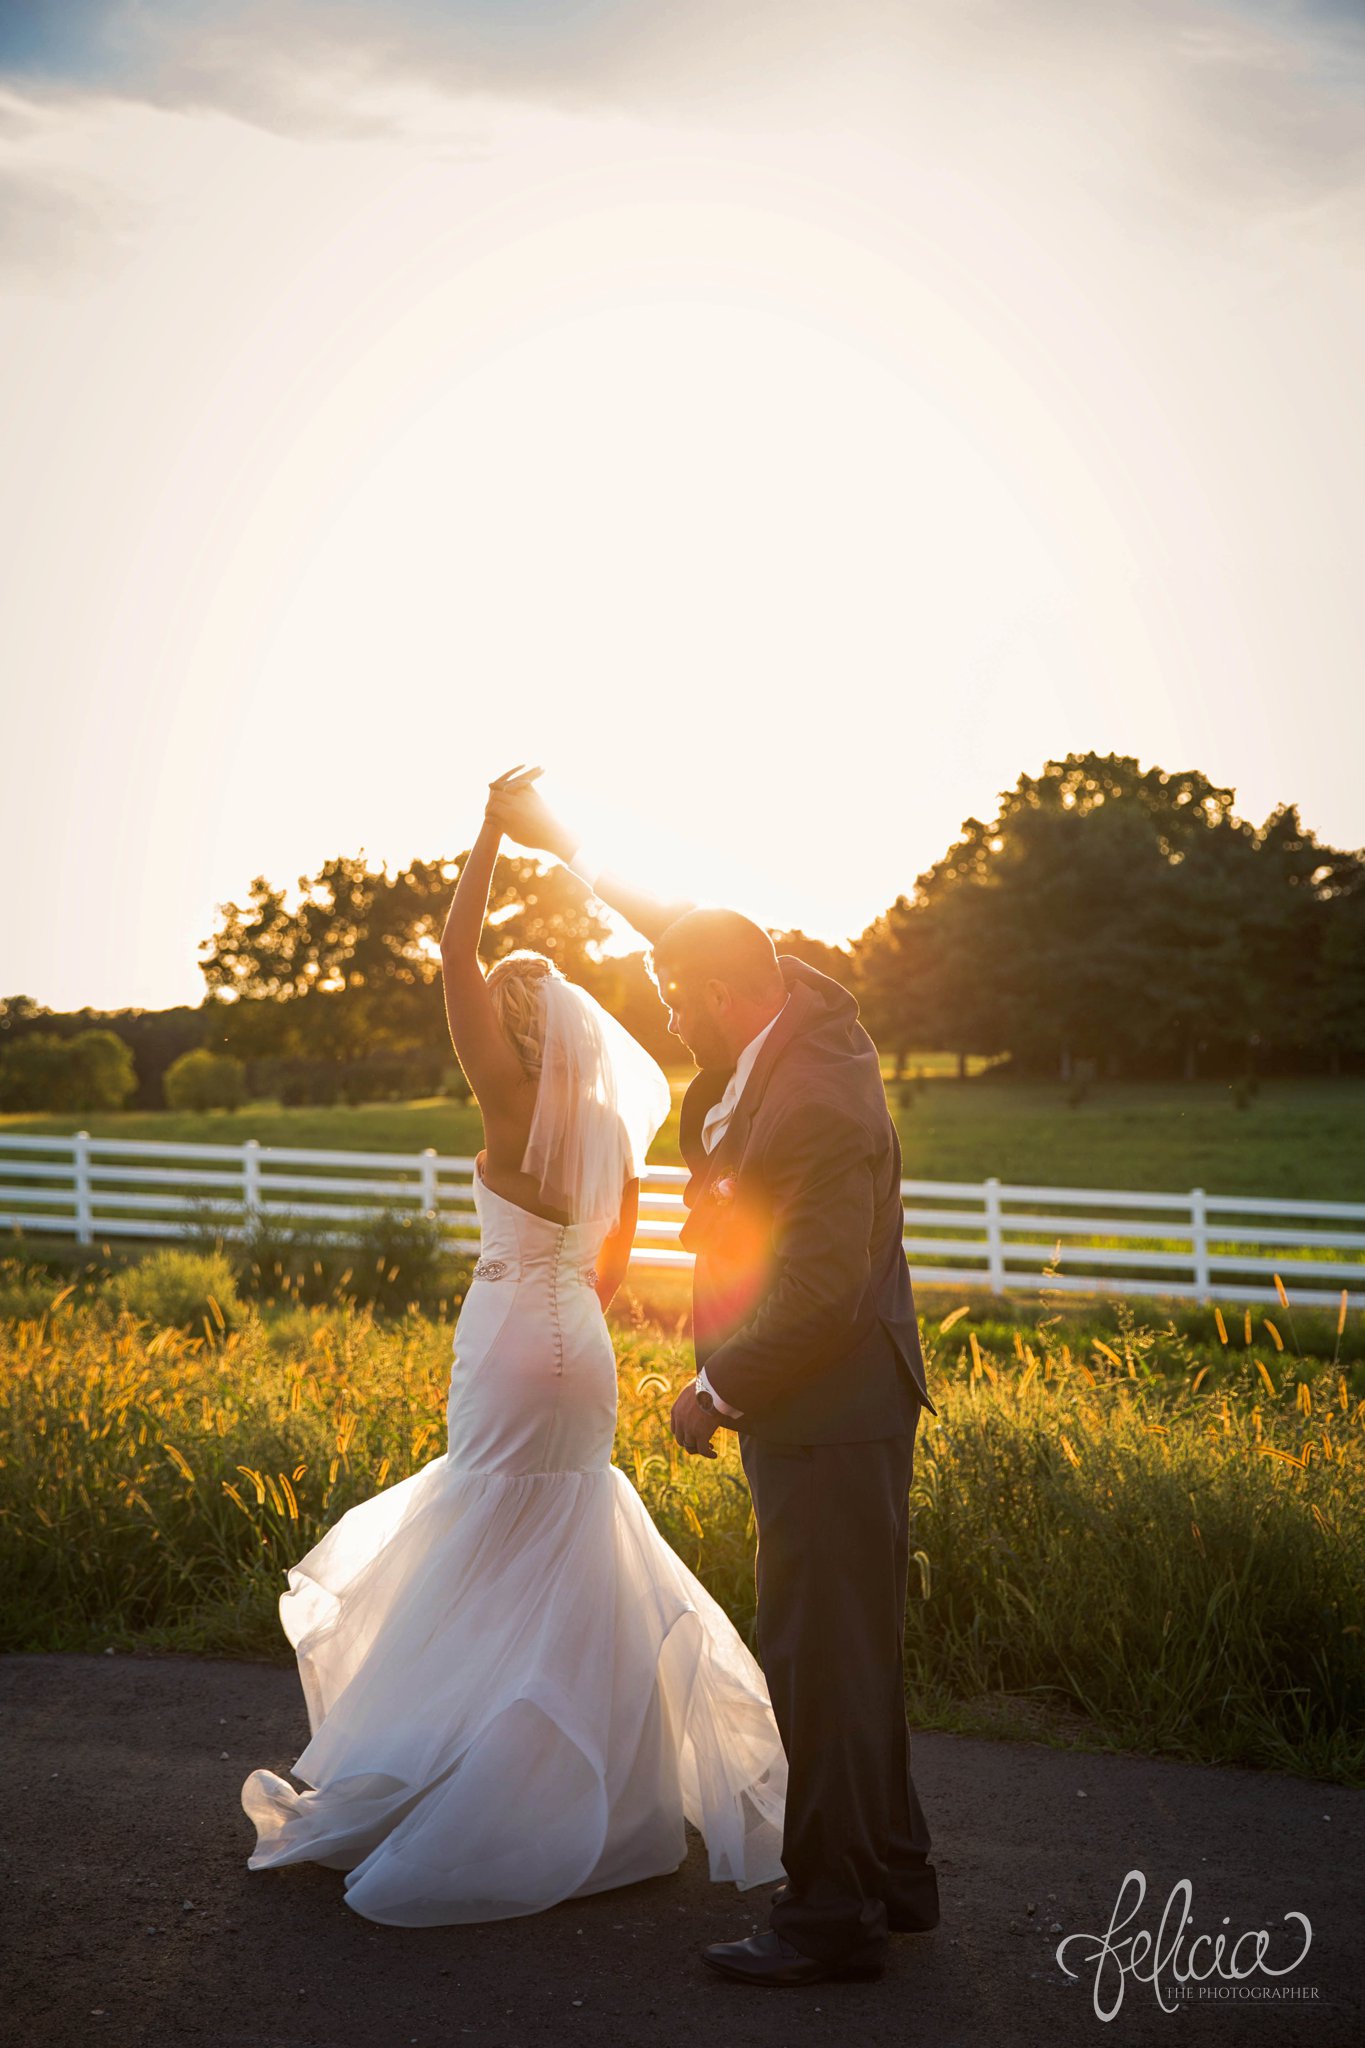 Bride and Groom Dancing | Photography | Golden Hour | Flare | Sunset | White Picket Fence | Eighteen Ninety | Kansas City Wedding Venue | Felicia The Photographer